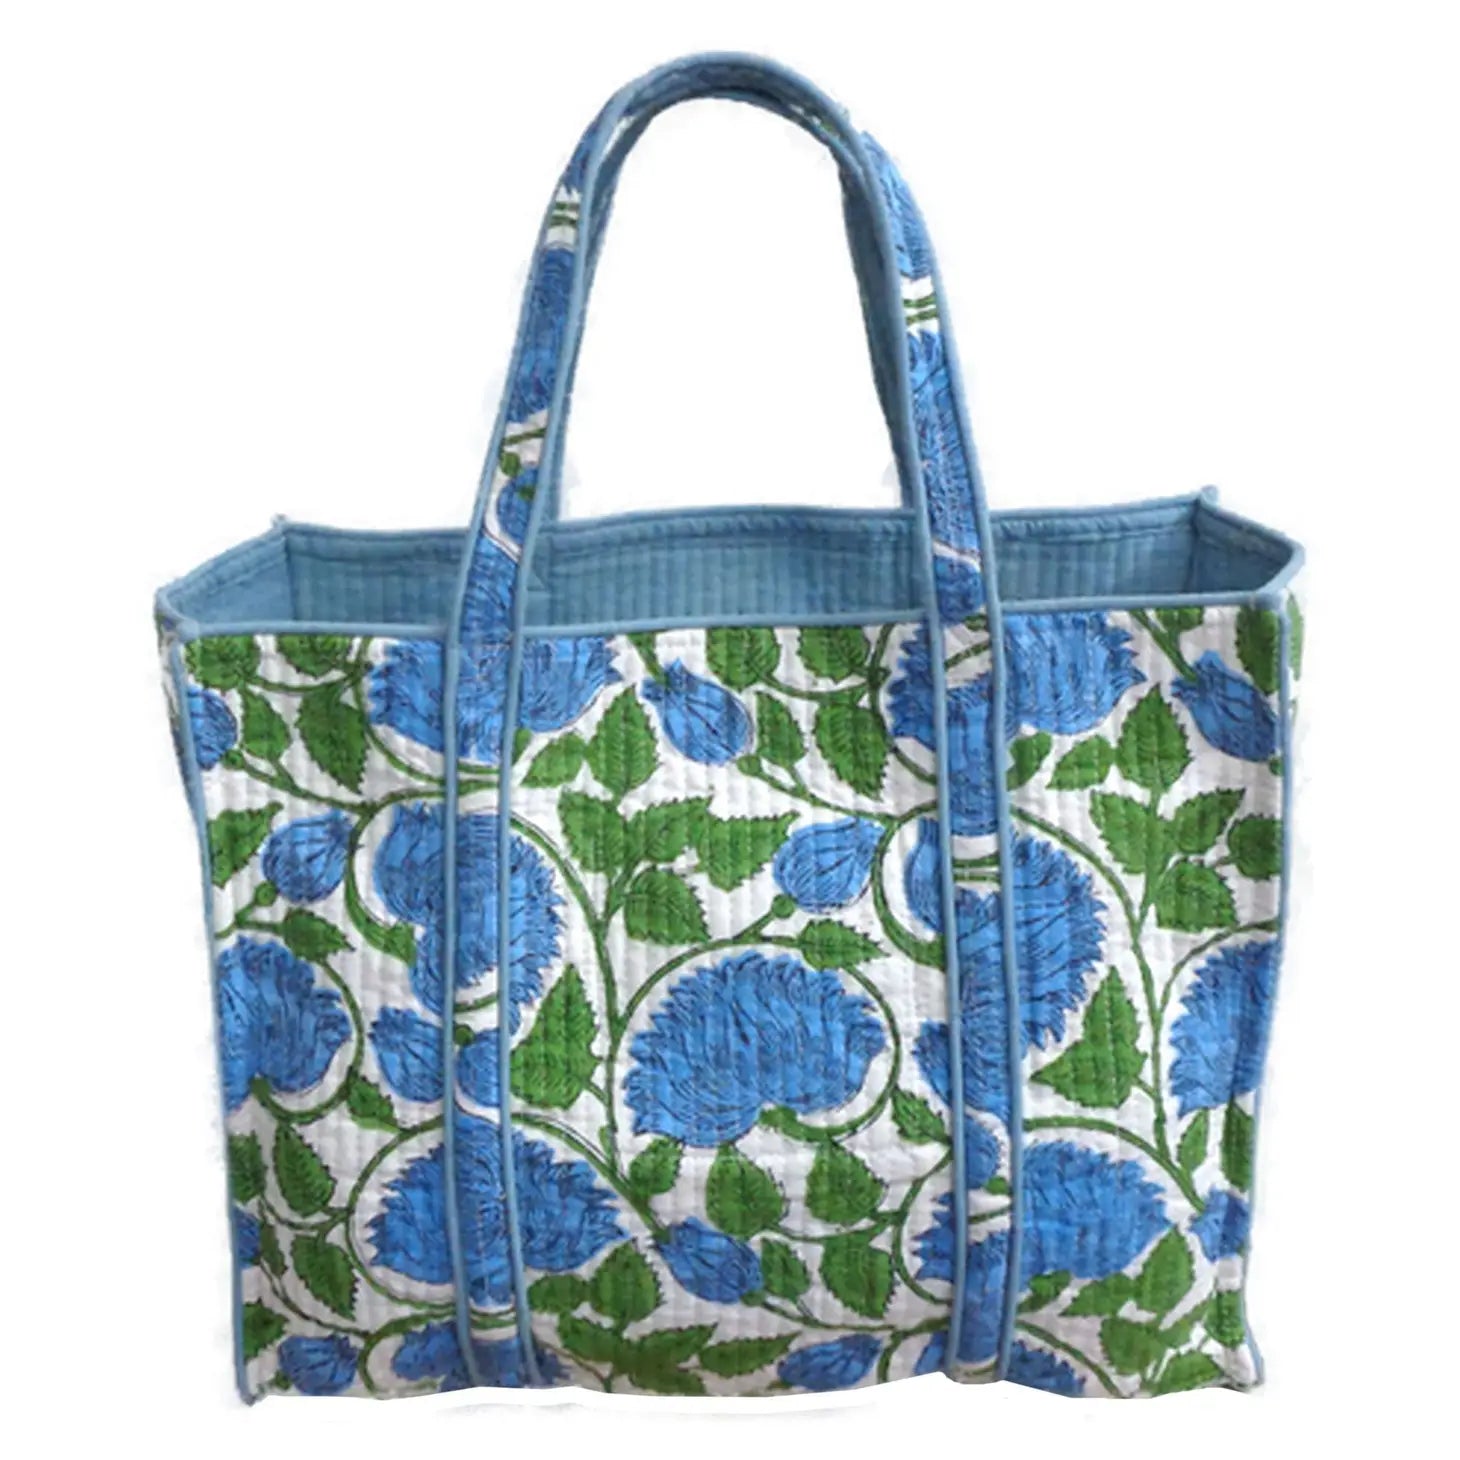 Aqua Printed Quilted Tote